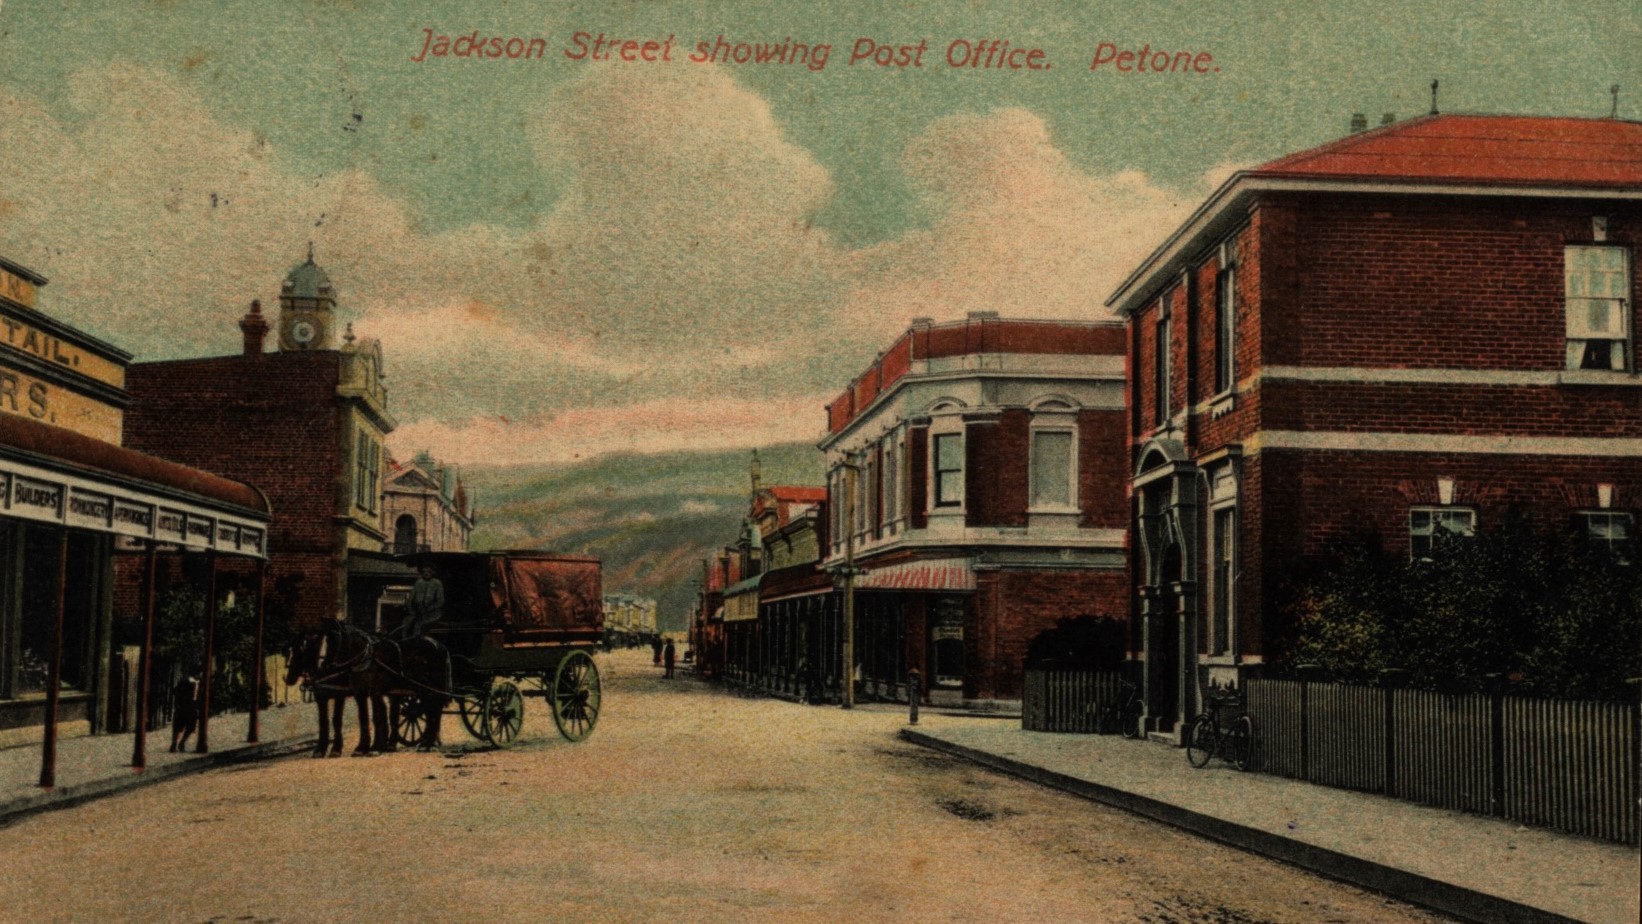 A historic colourised image of Jackson Street showing the post office